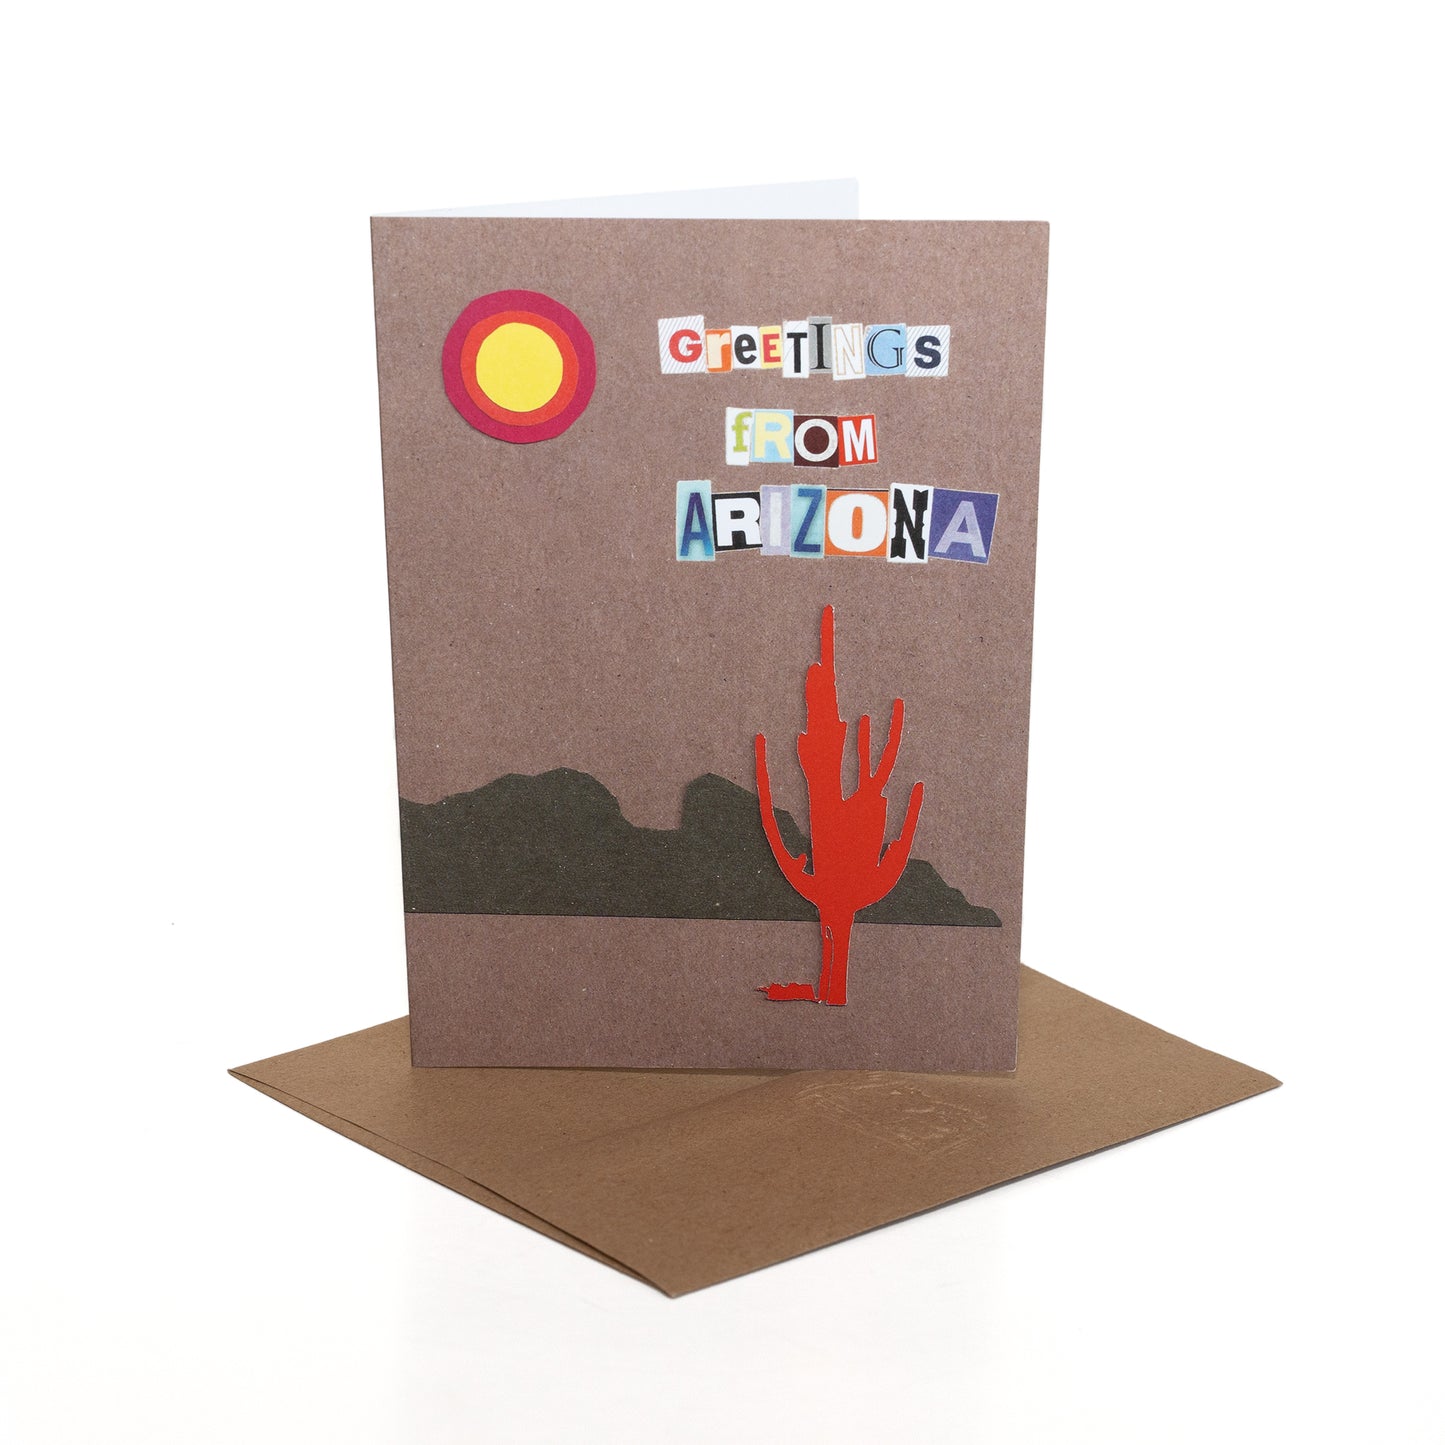 Greetings from Arizona cut letters card